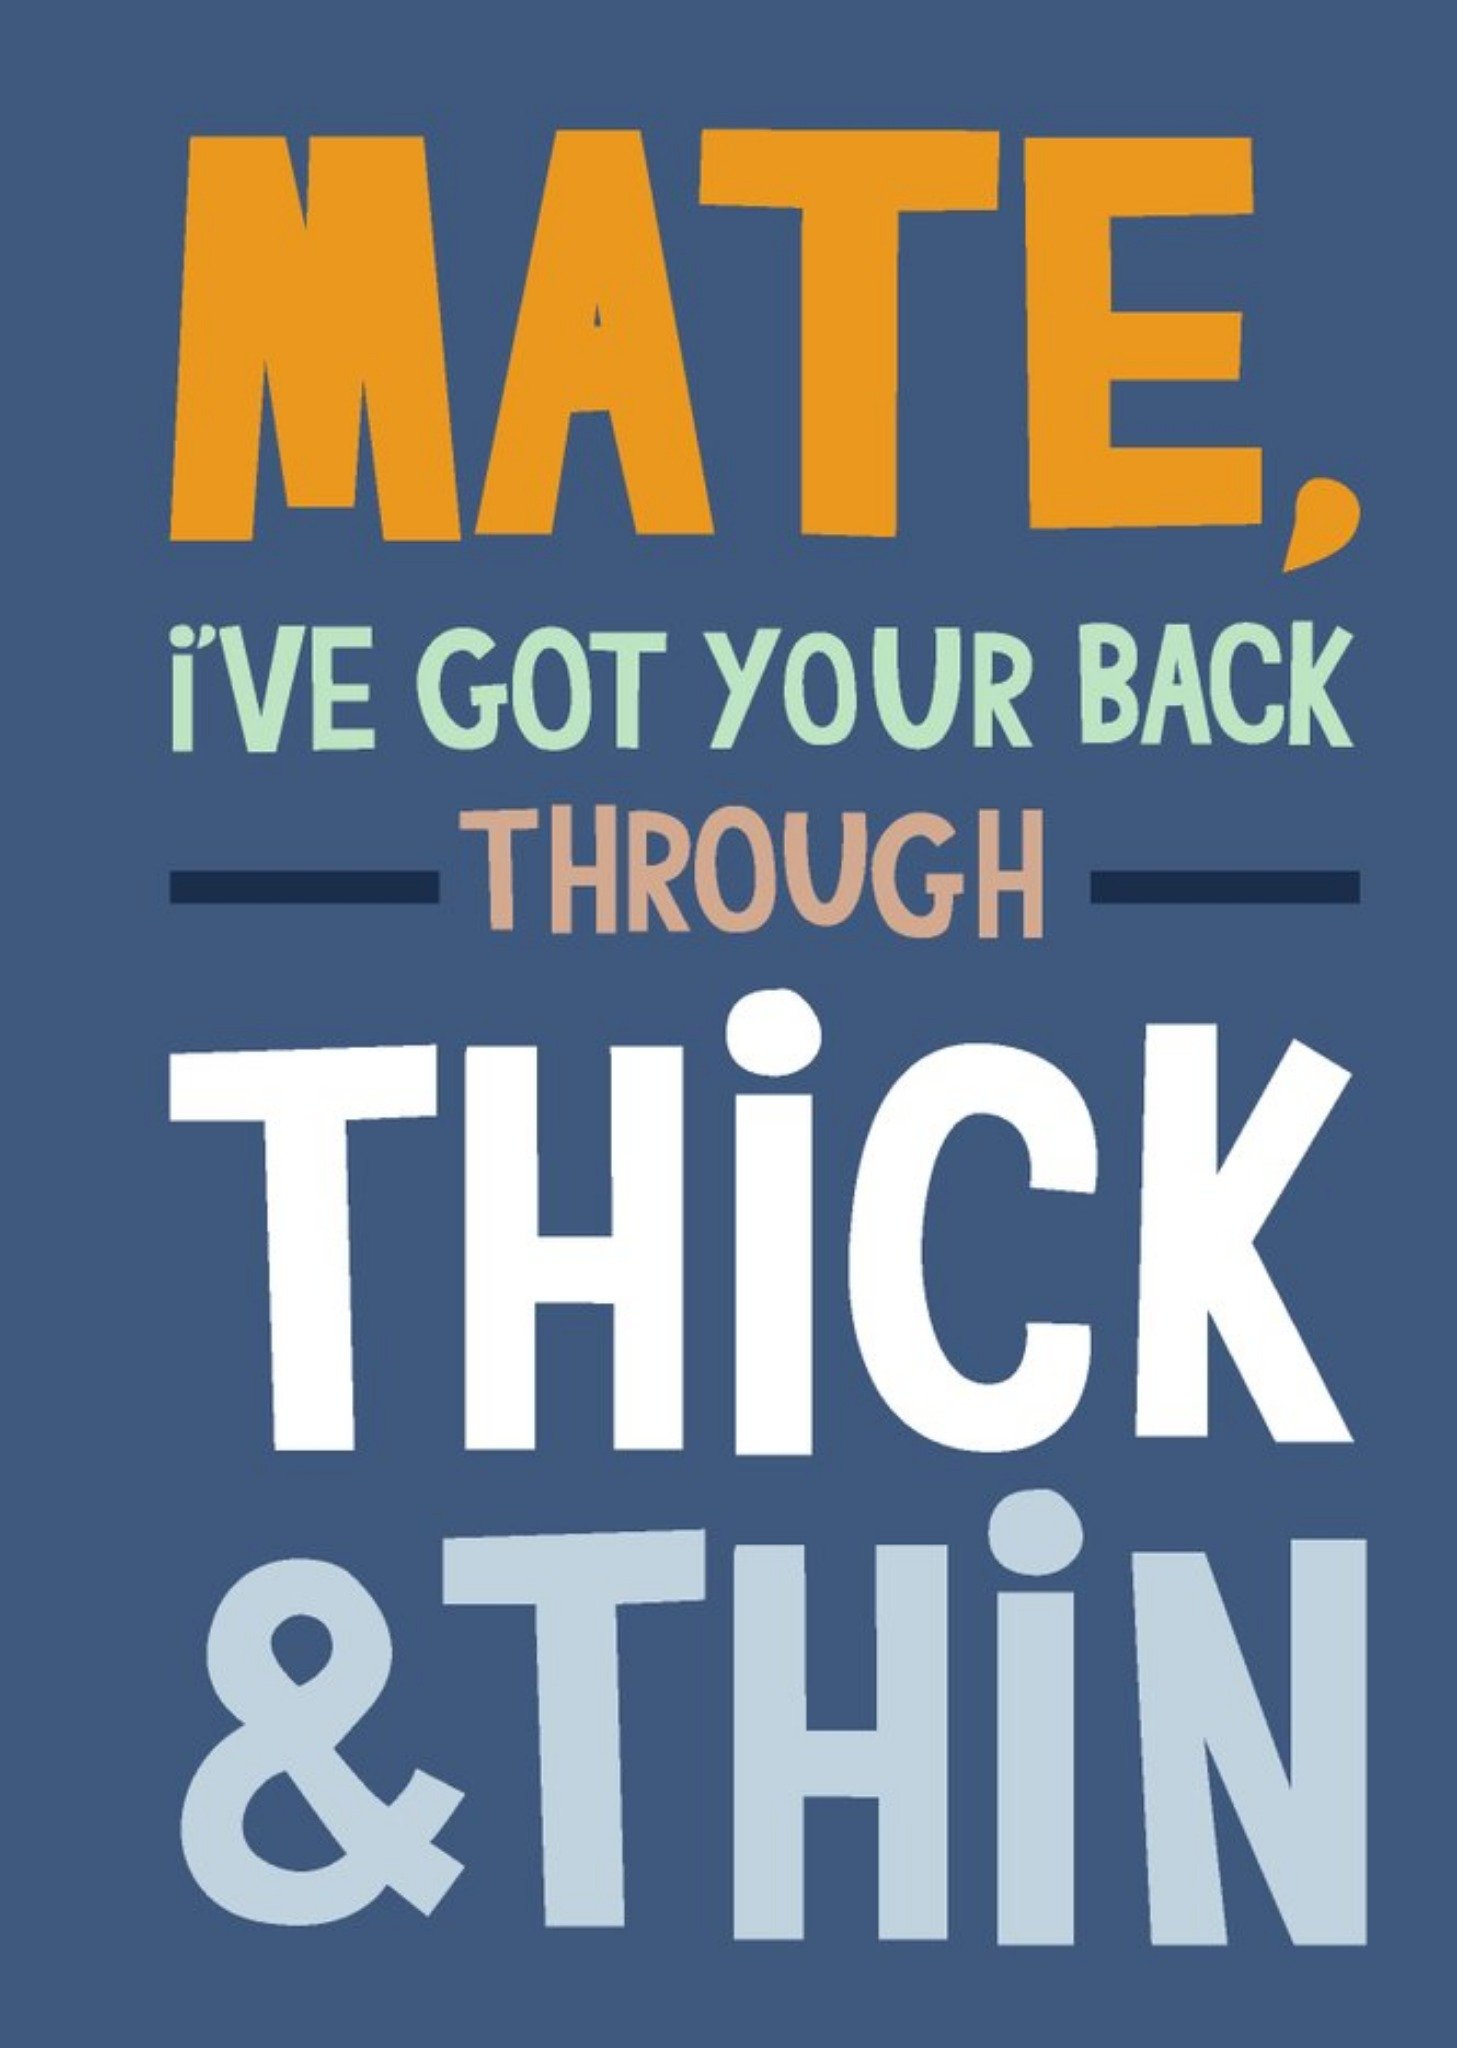 Moonpig Typographic Mate, I've Got Your Back Through Thick And Thin Card Ecard